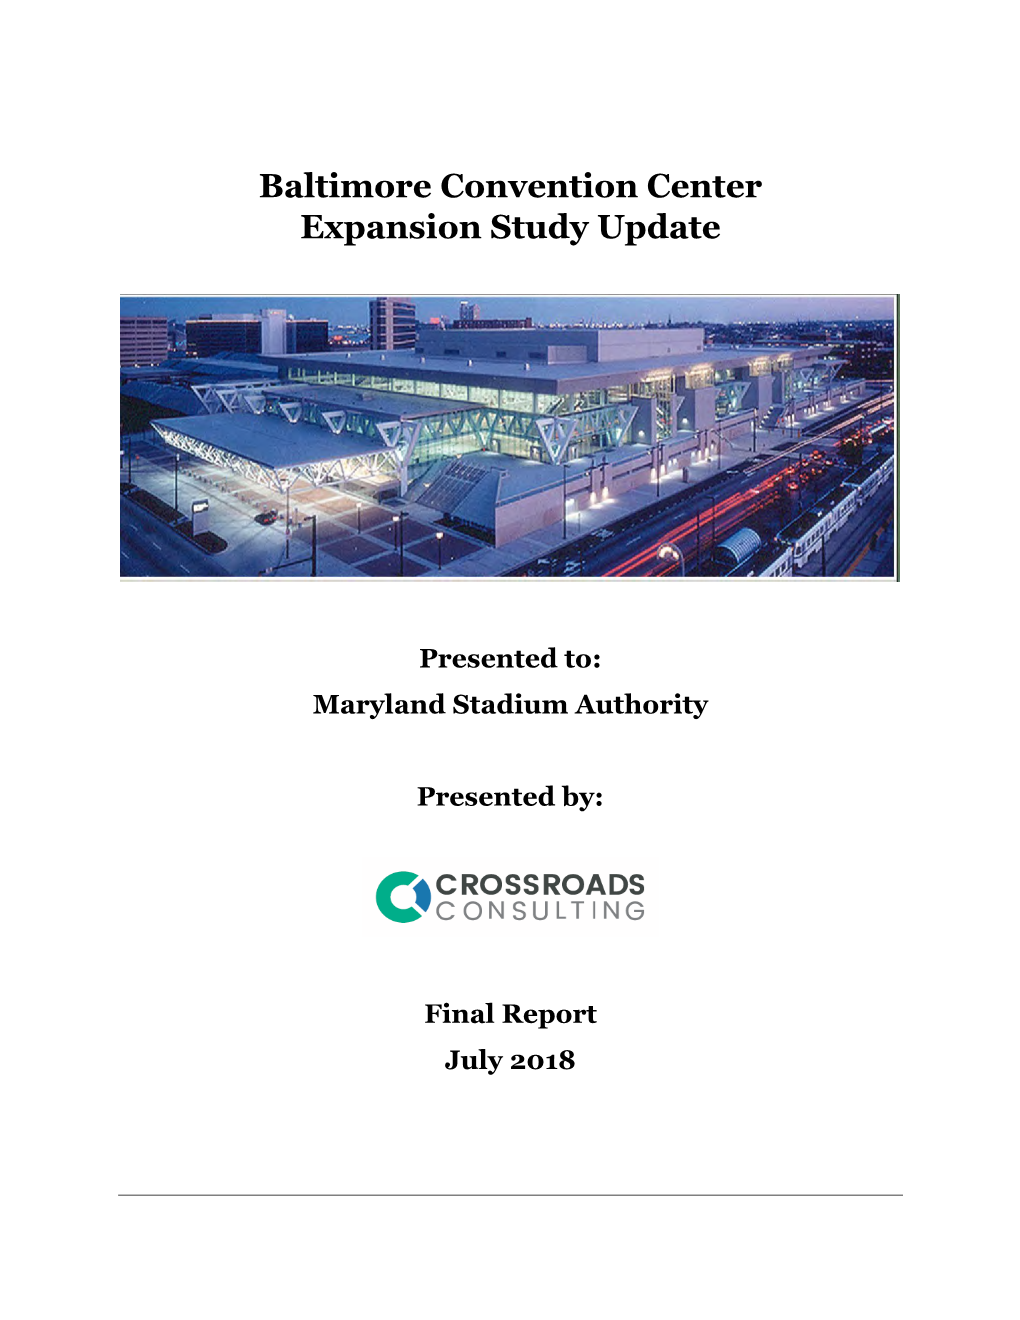 Baltimore Convention Center Expansion Study Update